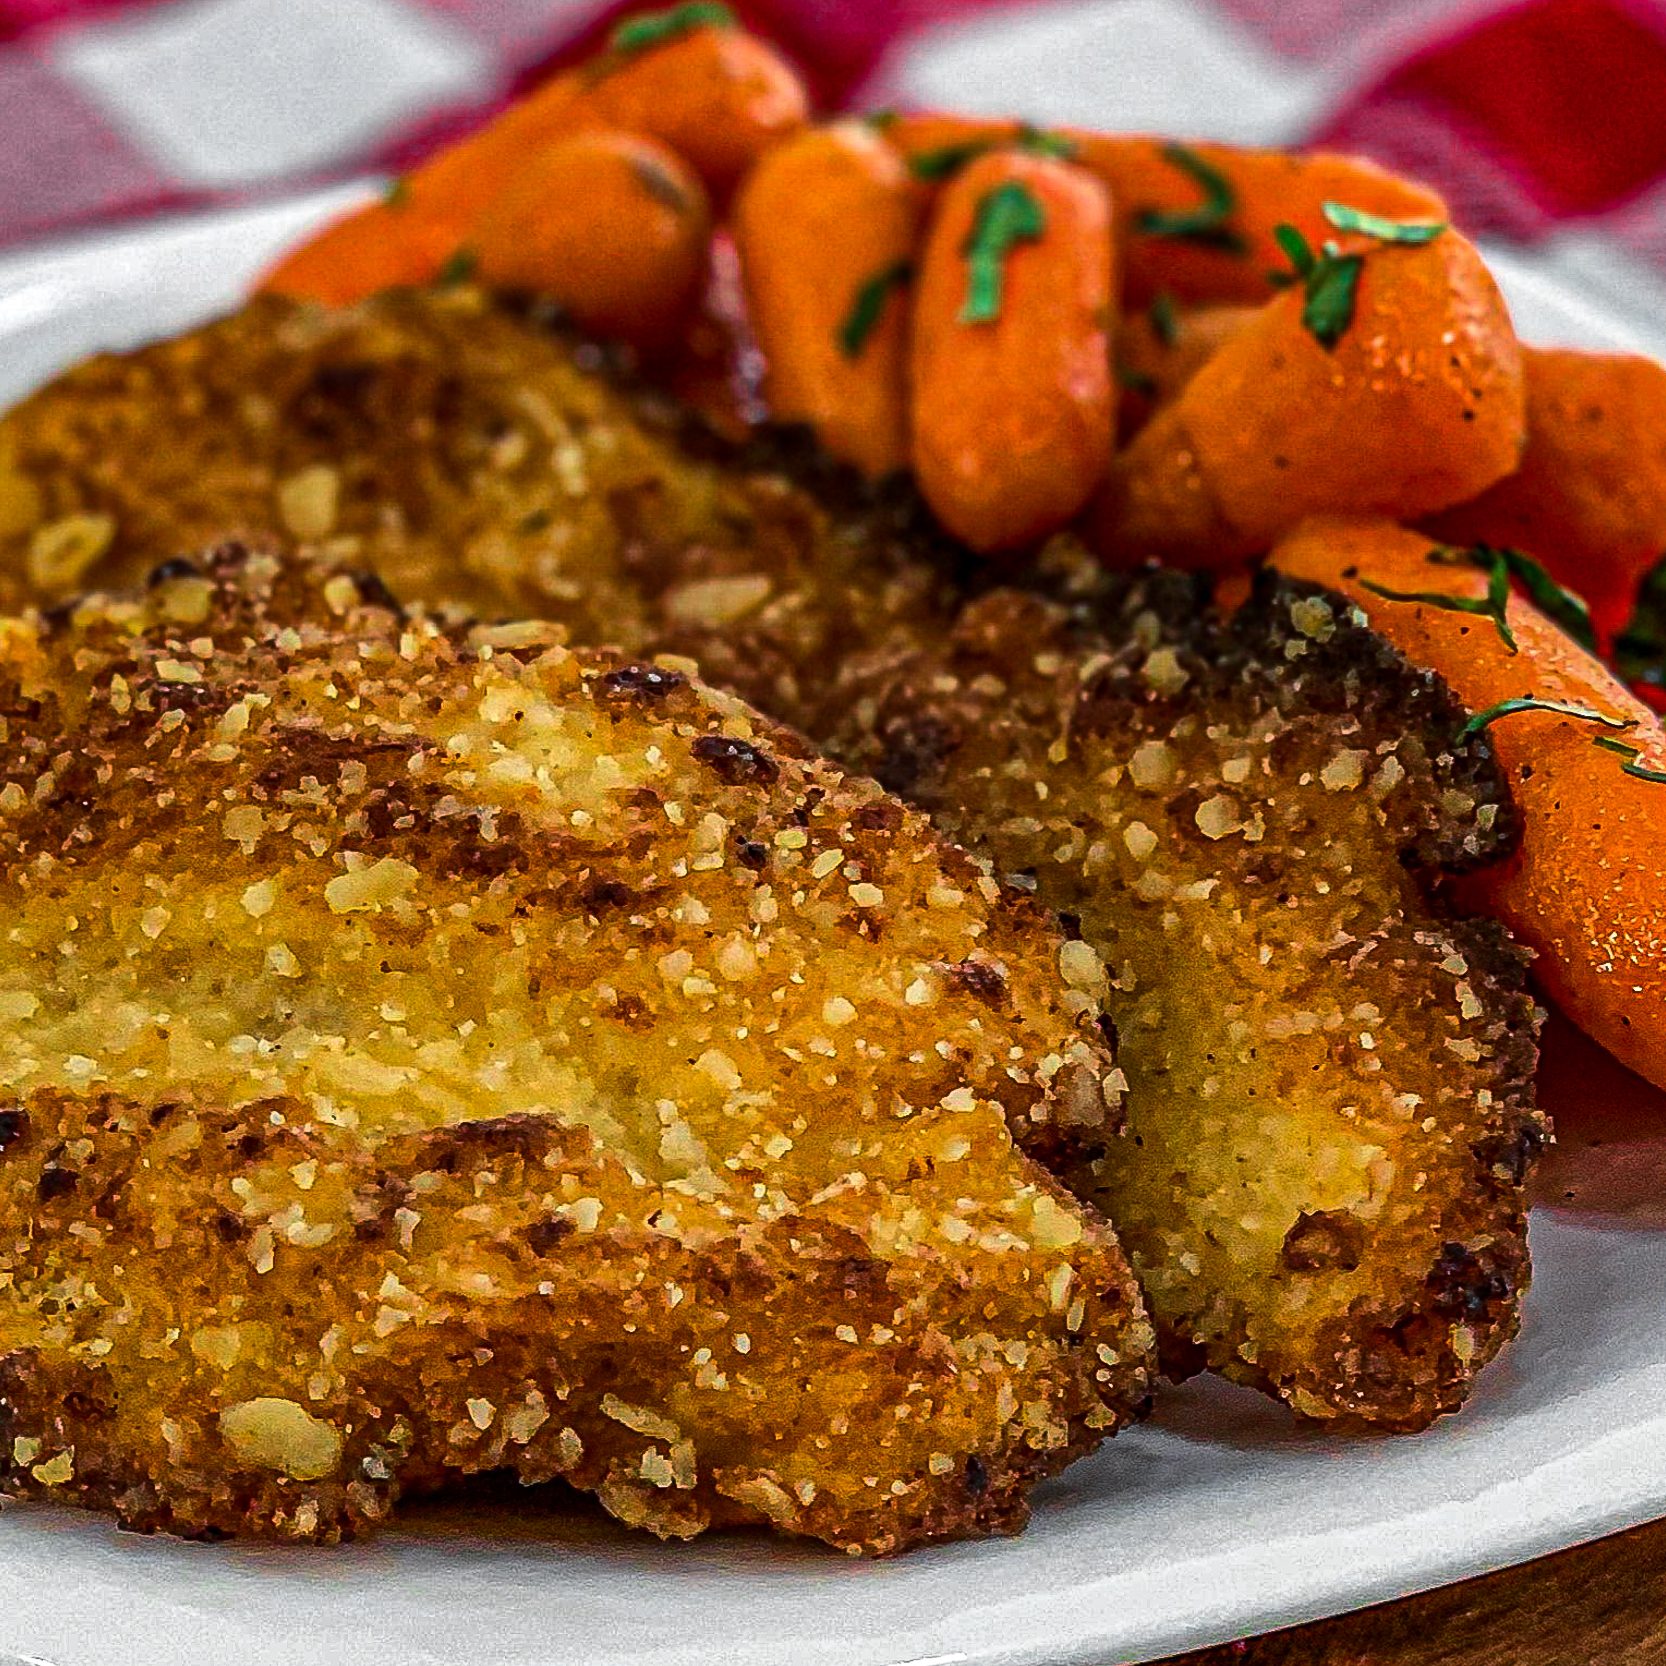 Serve with mashed potatoes or our Glazed Carrots (Insert Glazed Carrots Recipe HERE) and enjoy!